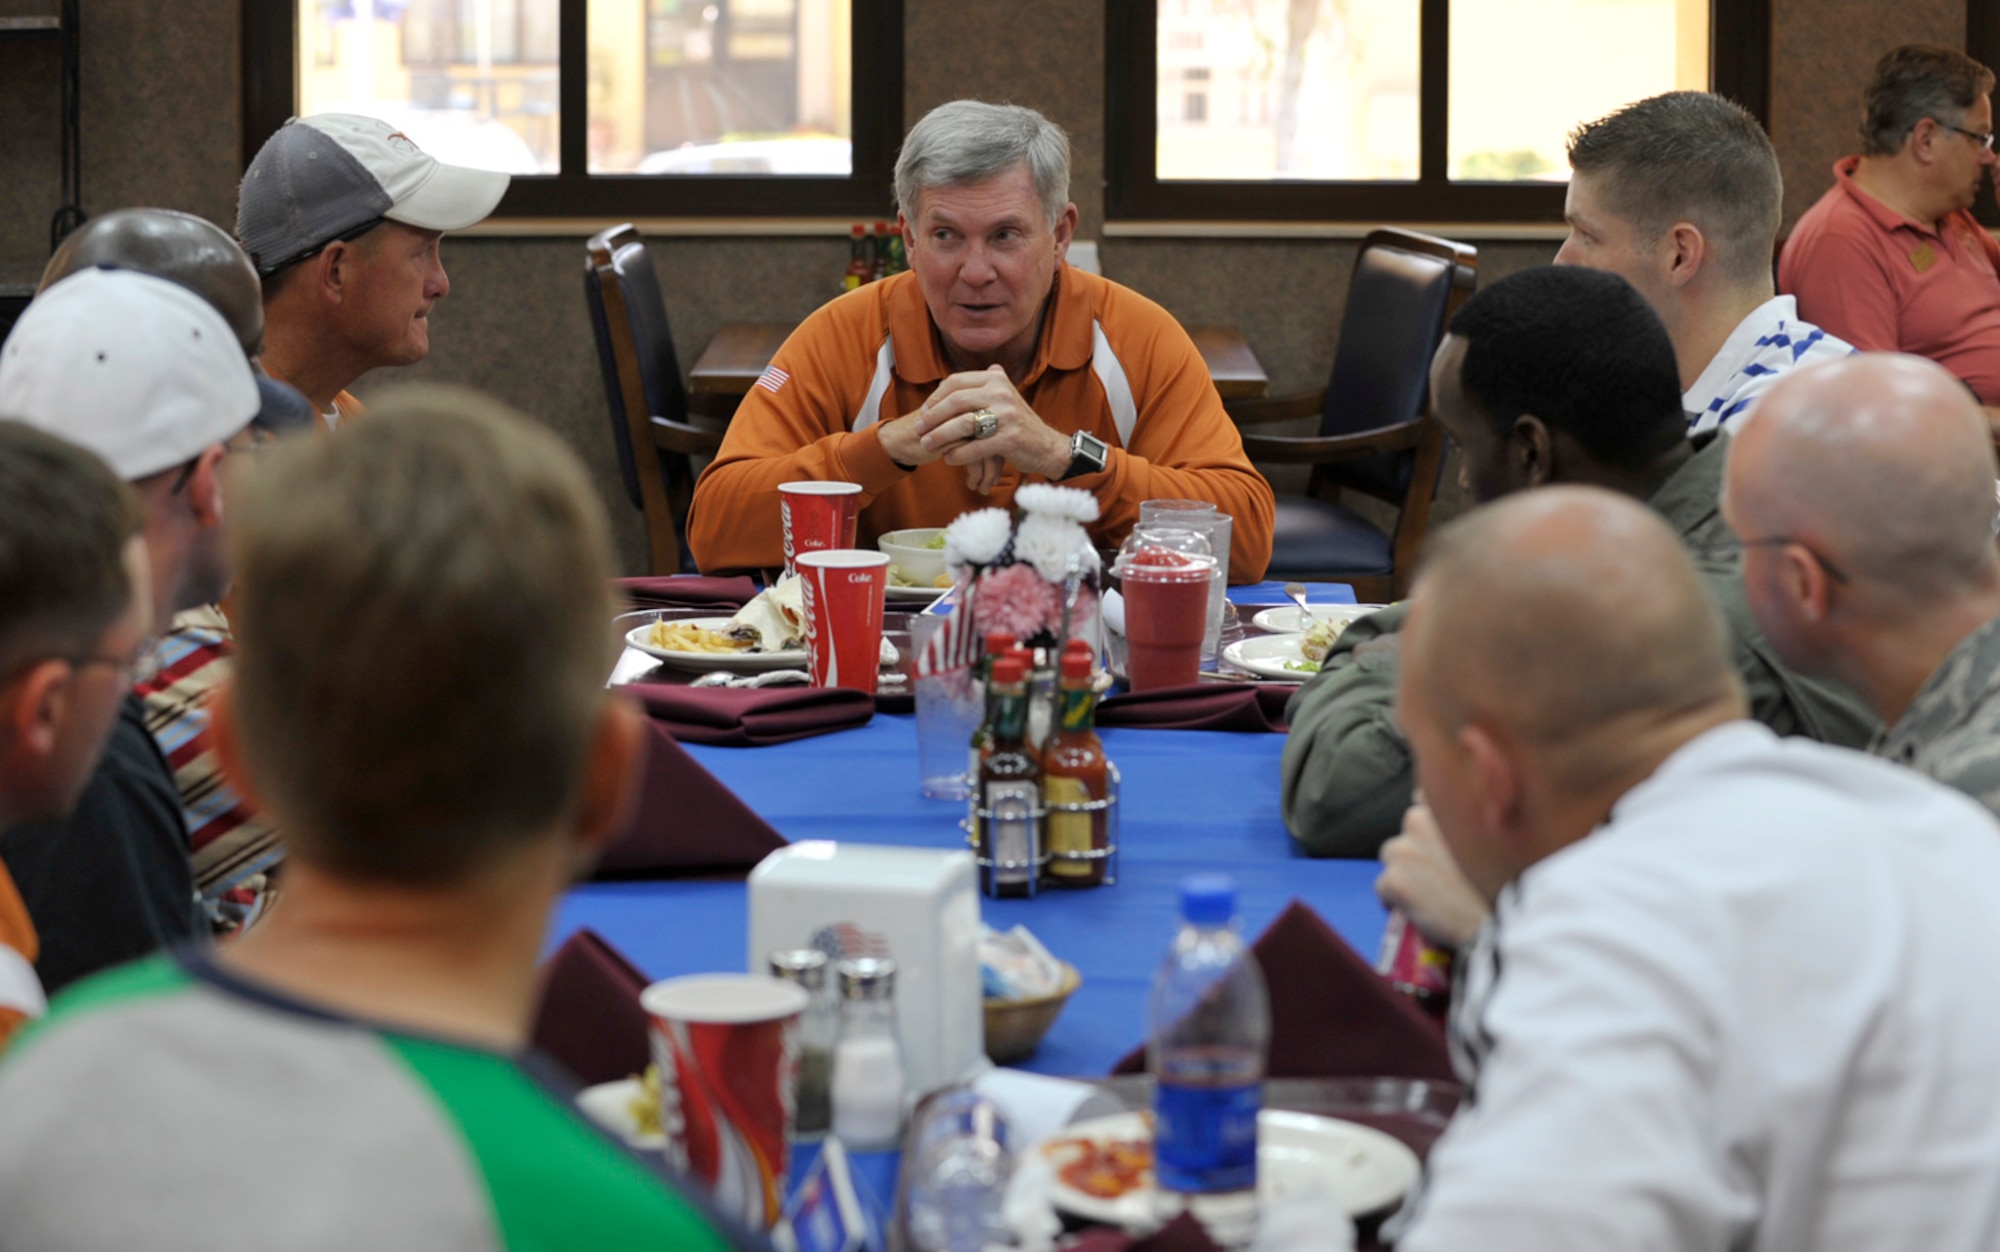 Mack Brown, head football coach at Texas University, talks to Airmen during a Sunday lunch at Incirlik Air Base, Turkey. The base was an early stop during Coaches Tour 2009, a morale-boosting mission that brought NCAA football coaches to U.S. servicemembers overseas. (U.S. Air Force photo/Tech. Sgt. Jason Schaap)